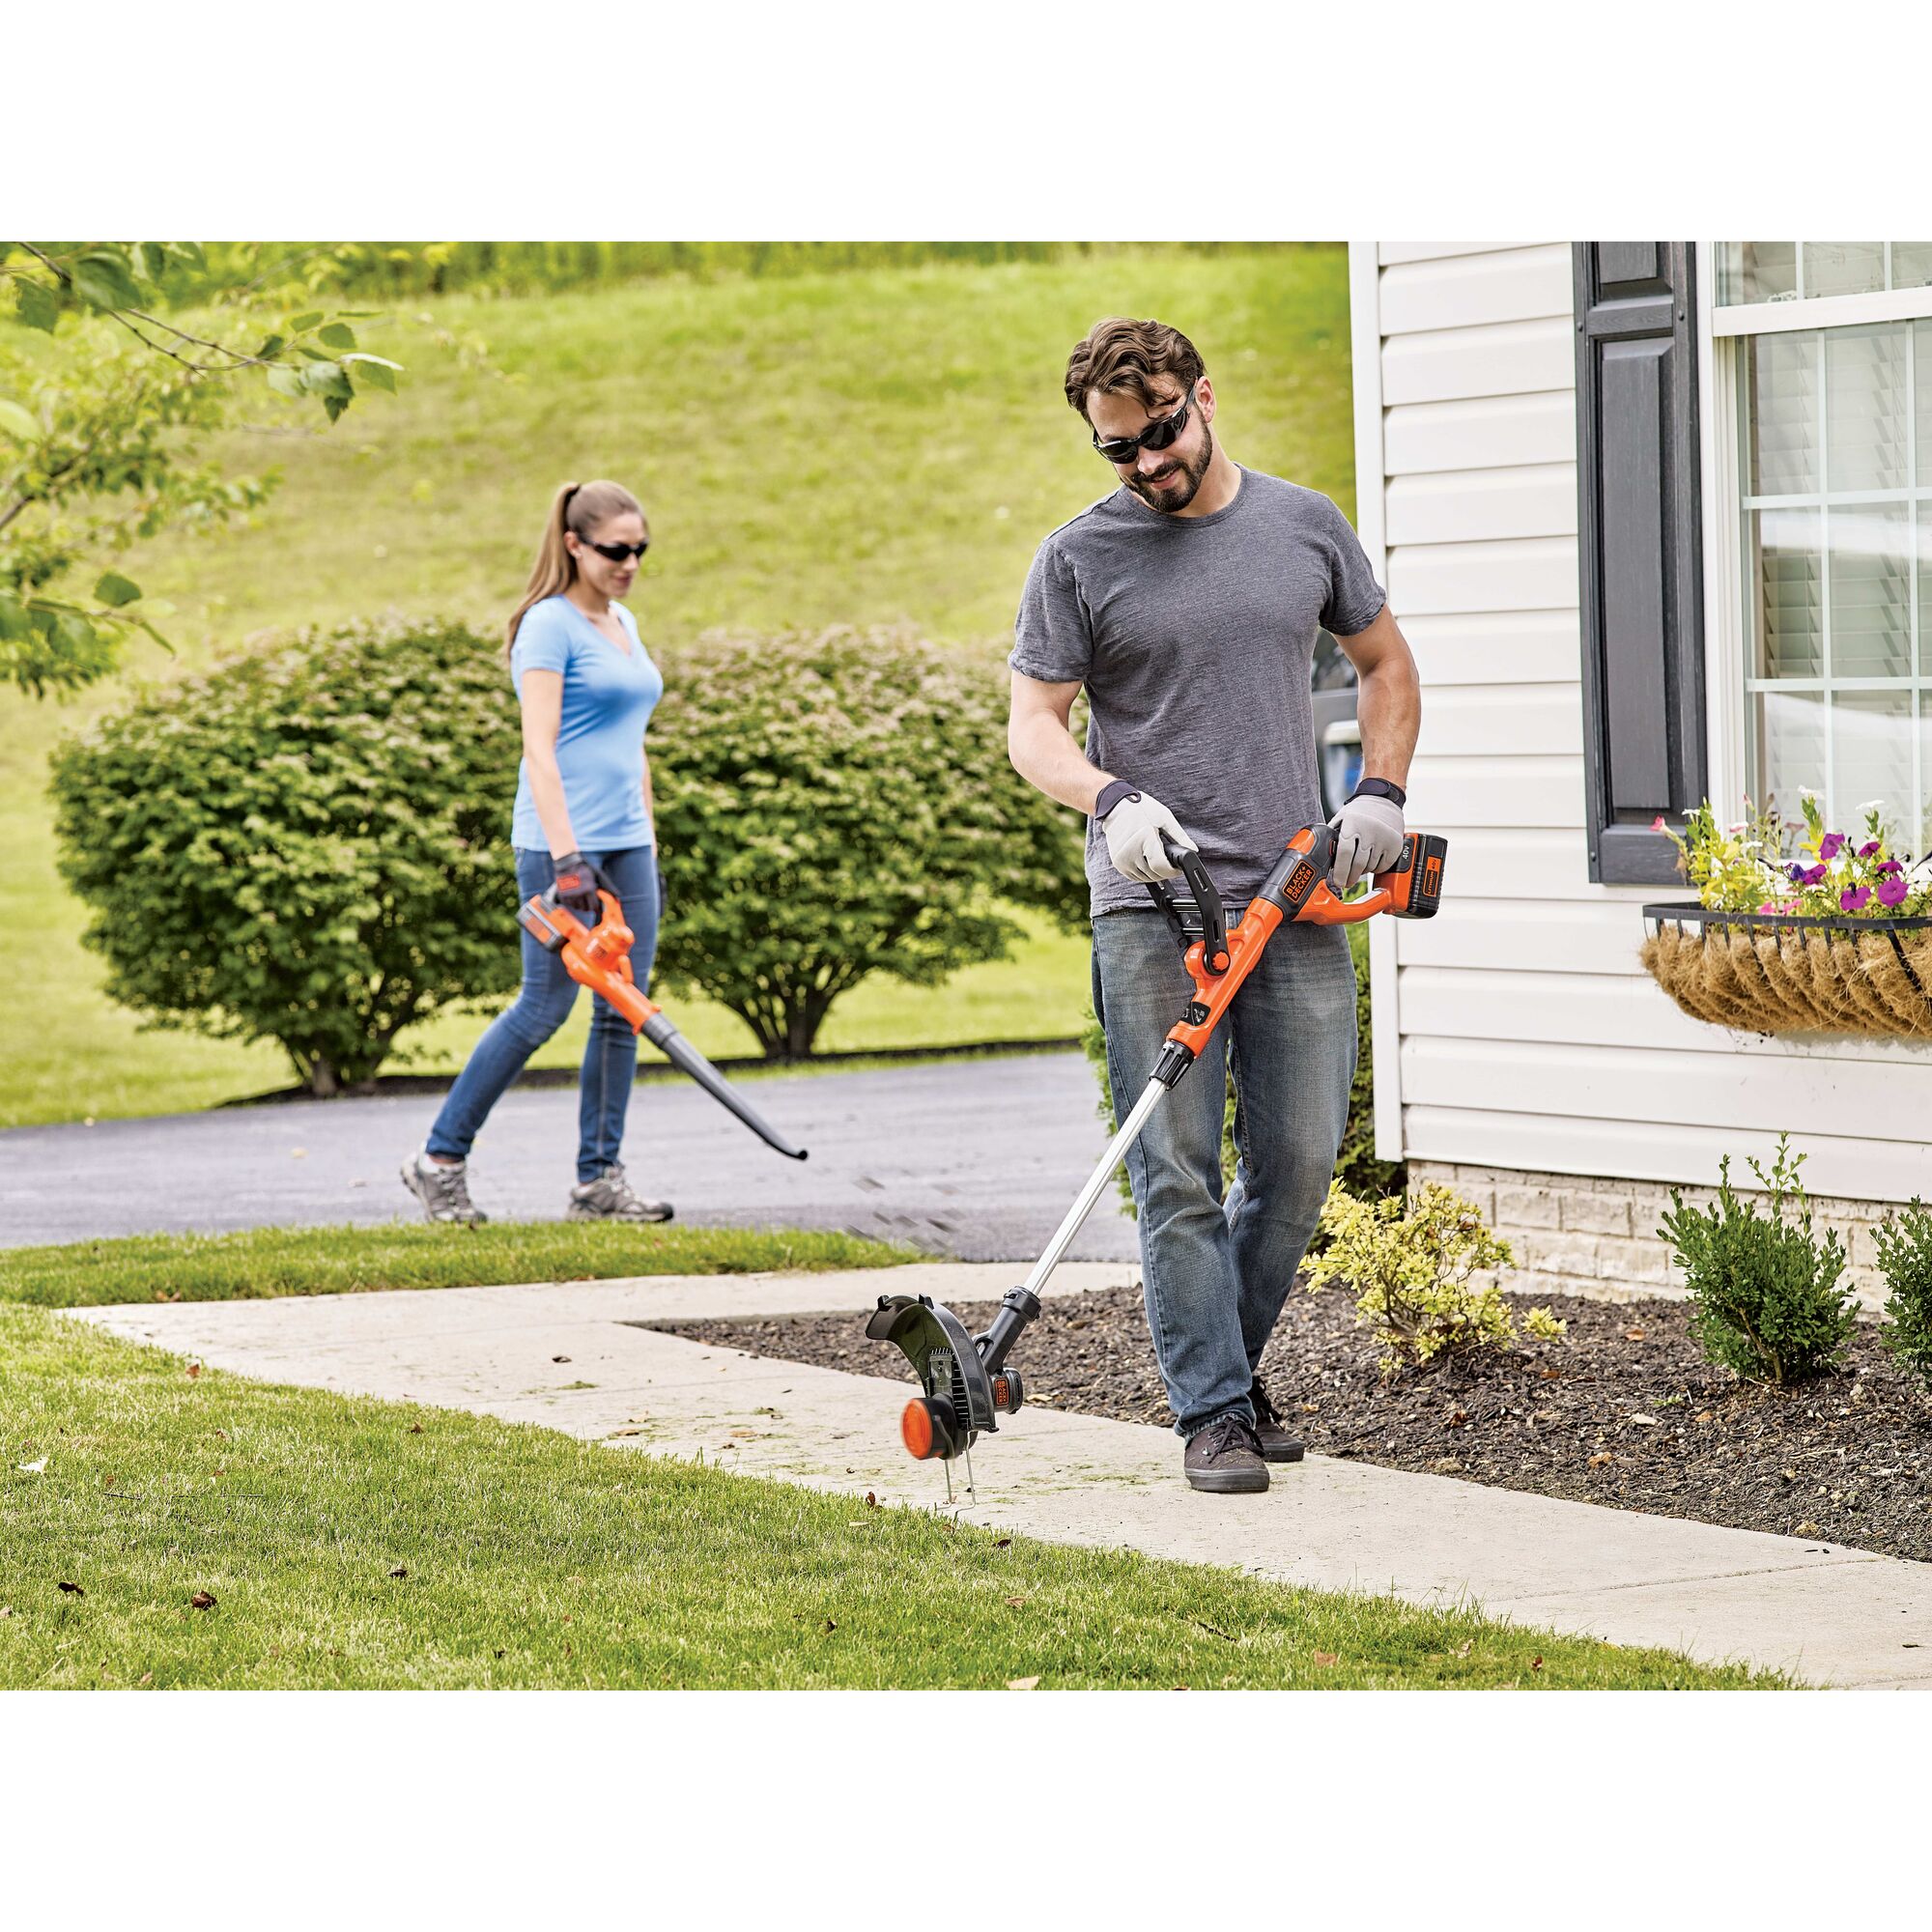 Couple doing yard word, one using string trimmer and other using leaf blower